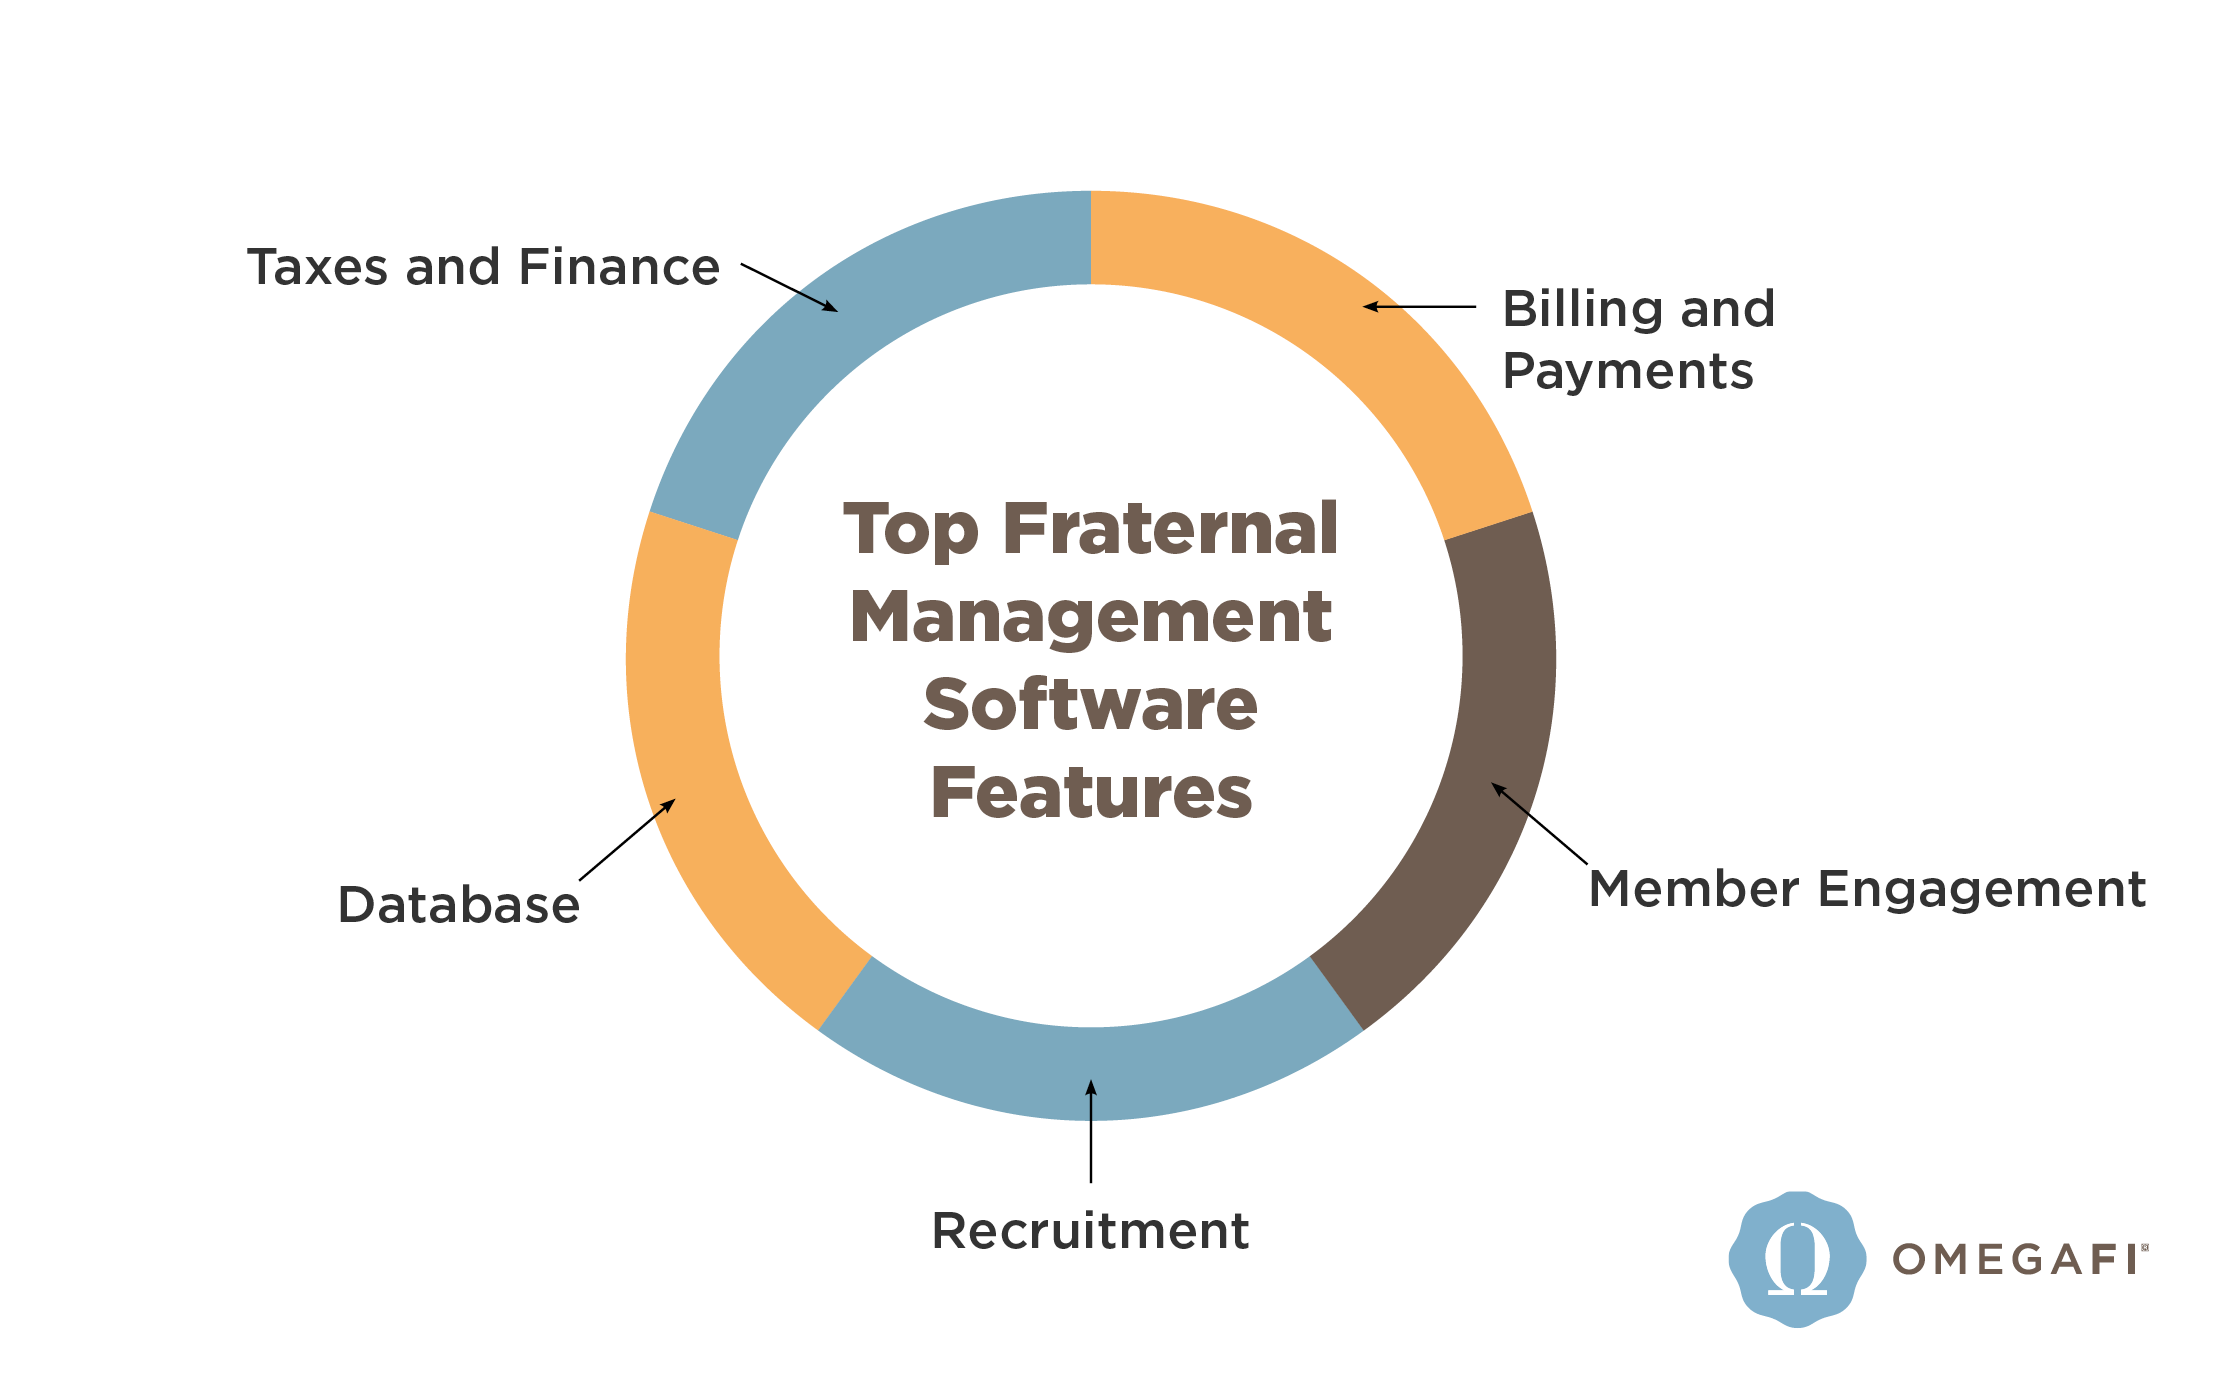 Benefits of fraternal software (as explained below)